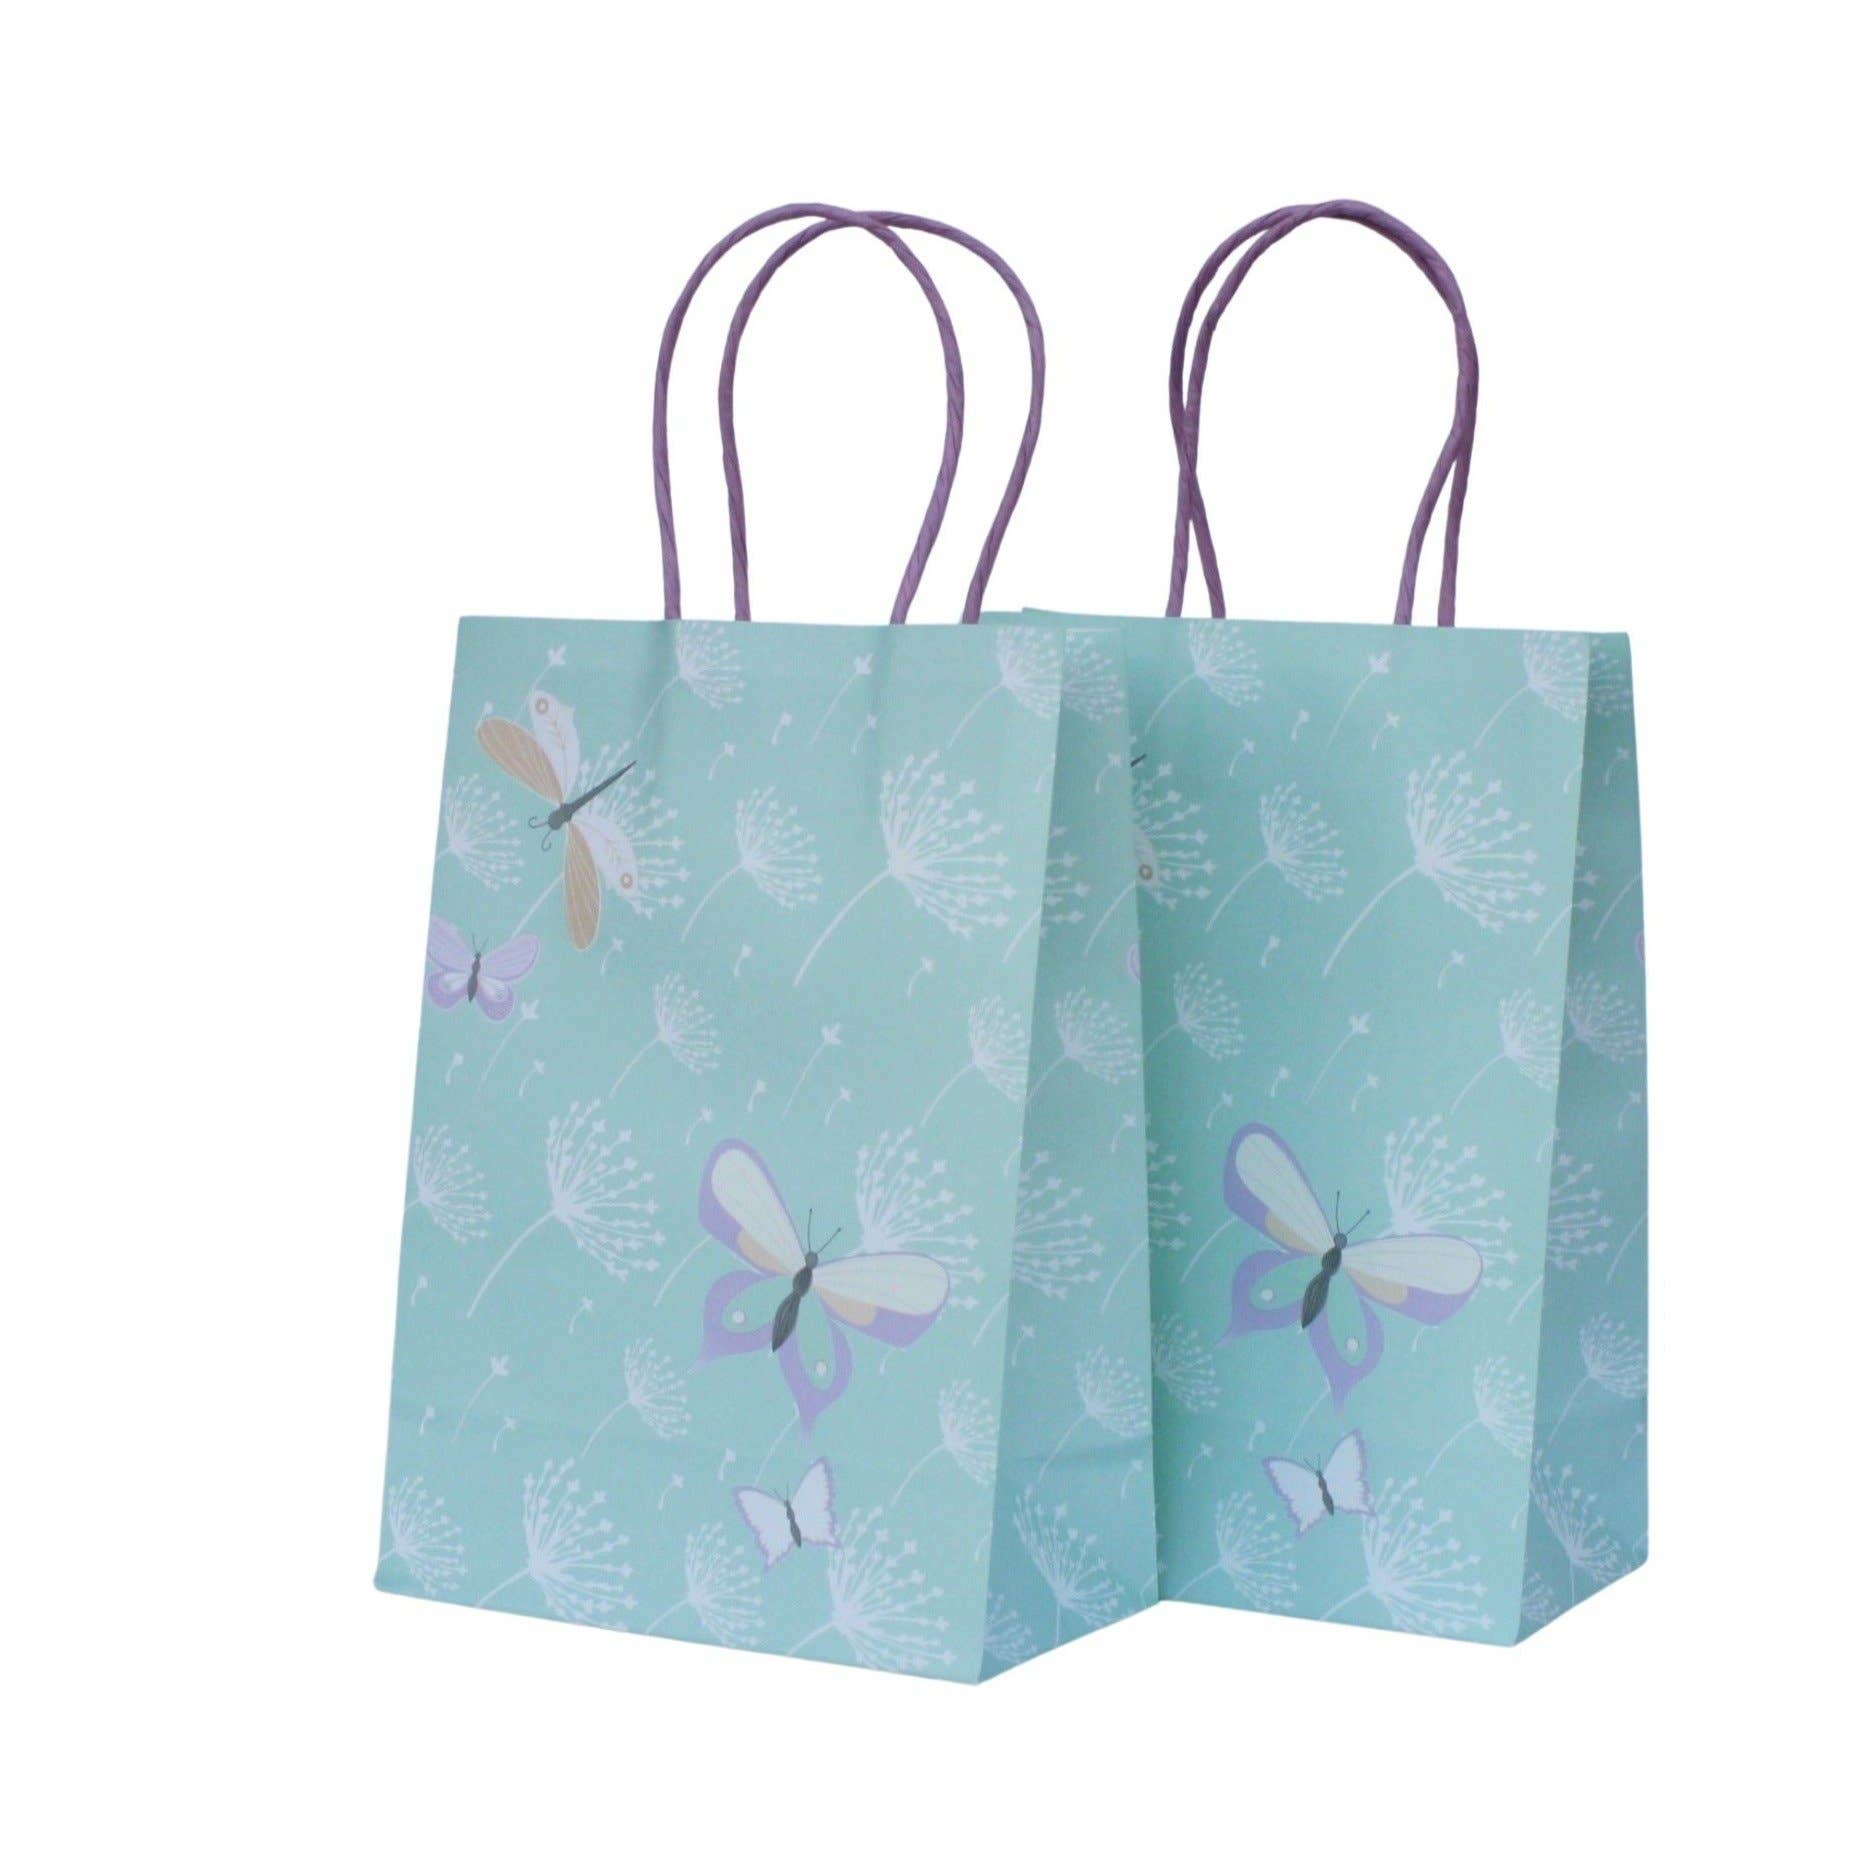 Magical Fairies Party Bags (Set of 8) - SimplySoiree